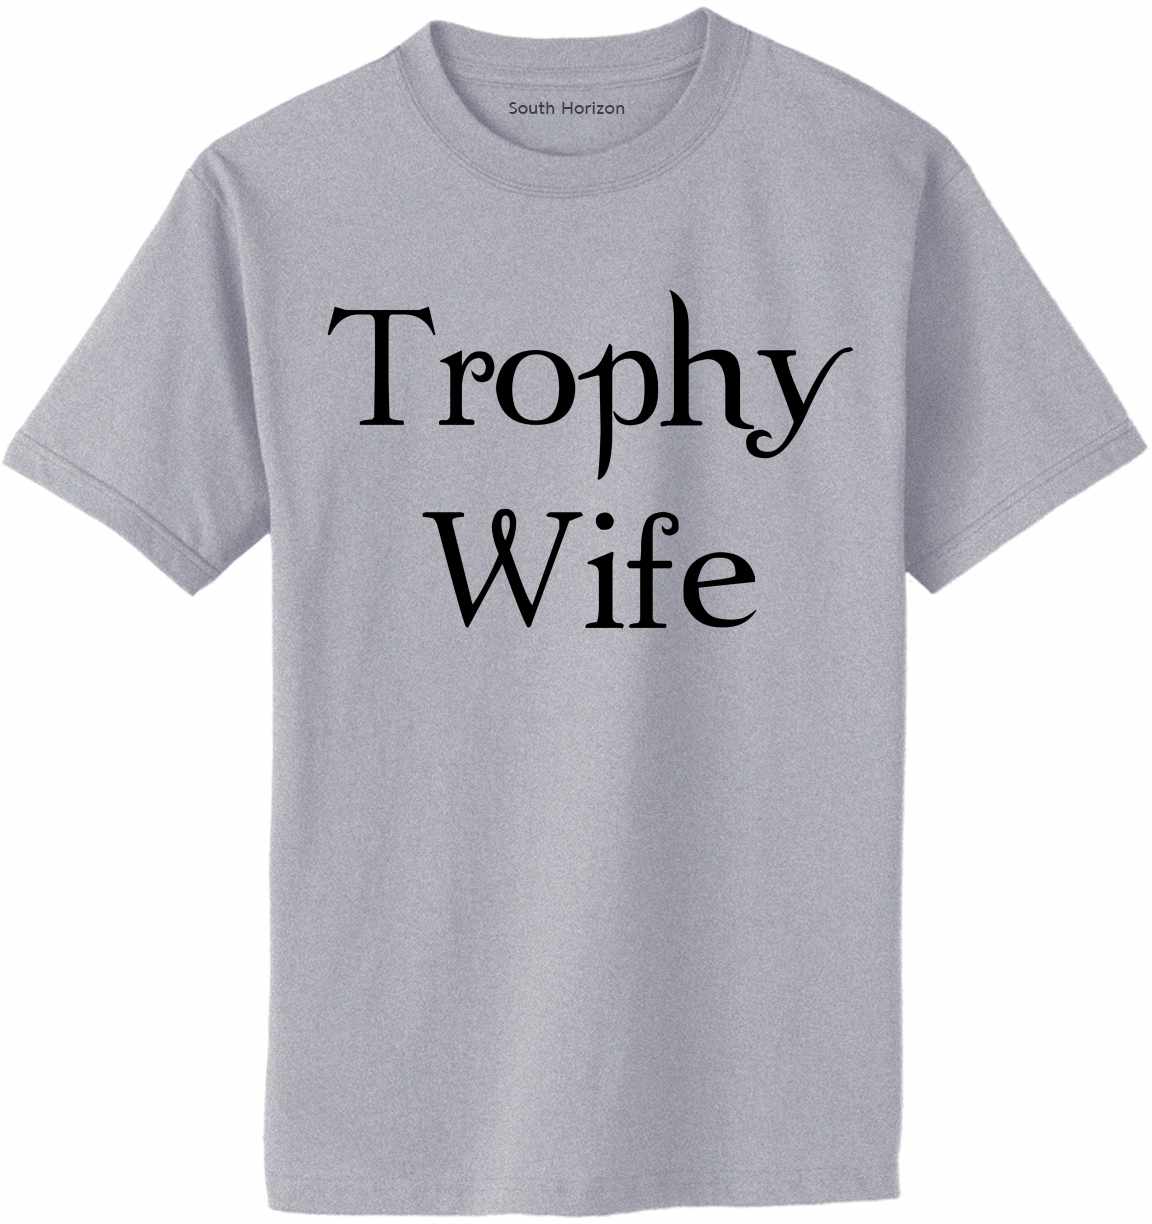 Trophy Wife on Adult T-Shirt (#1282-1)